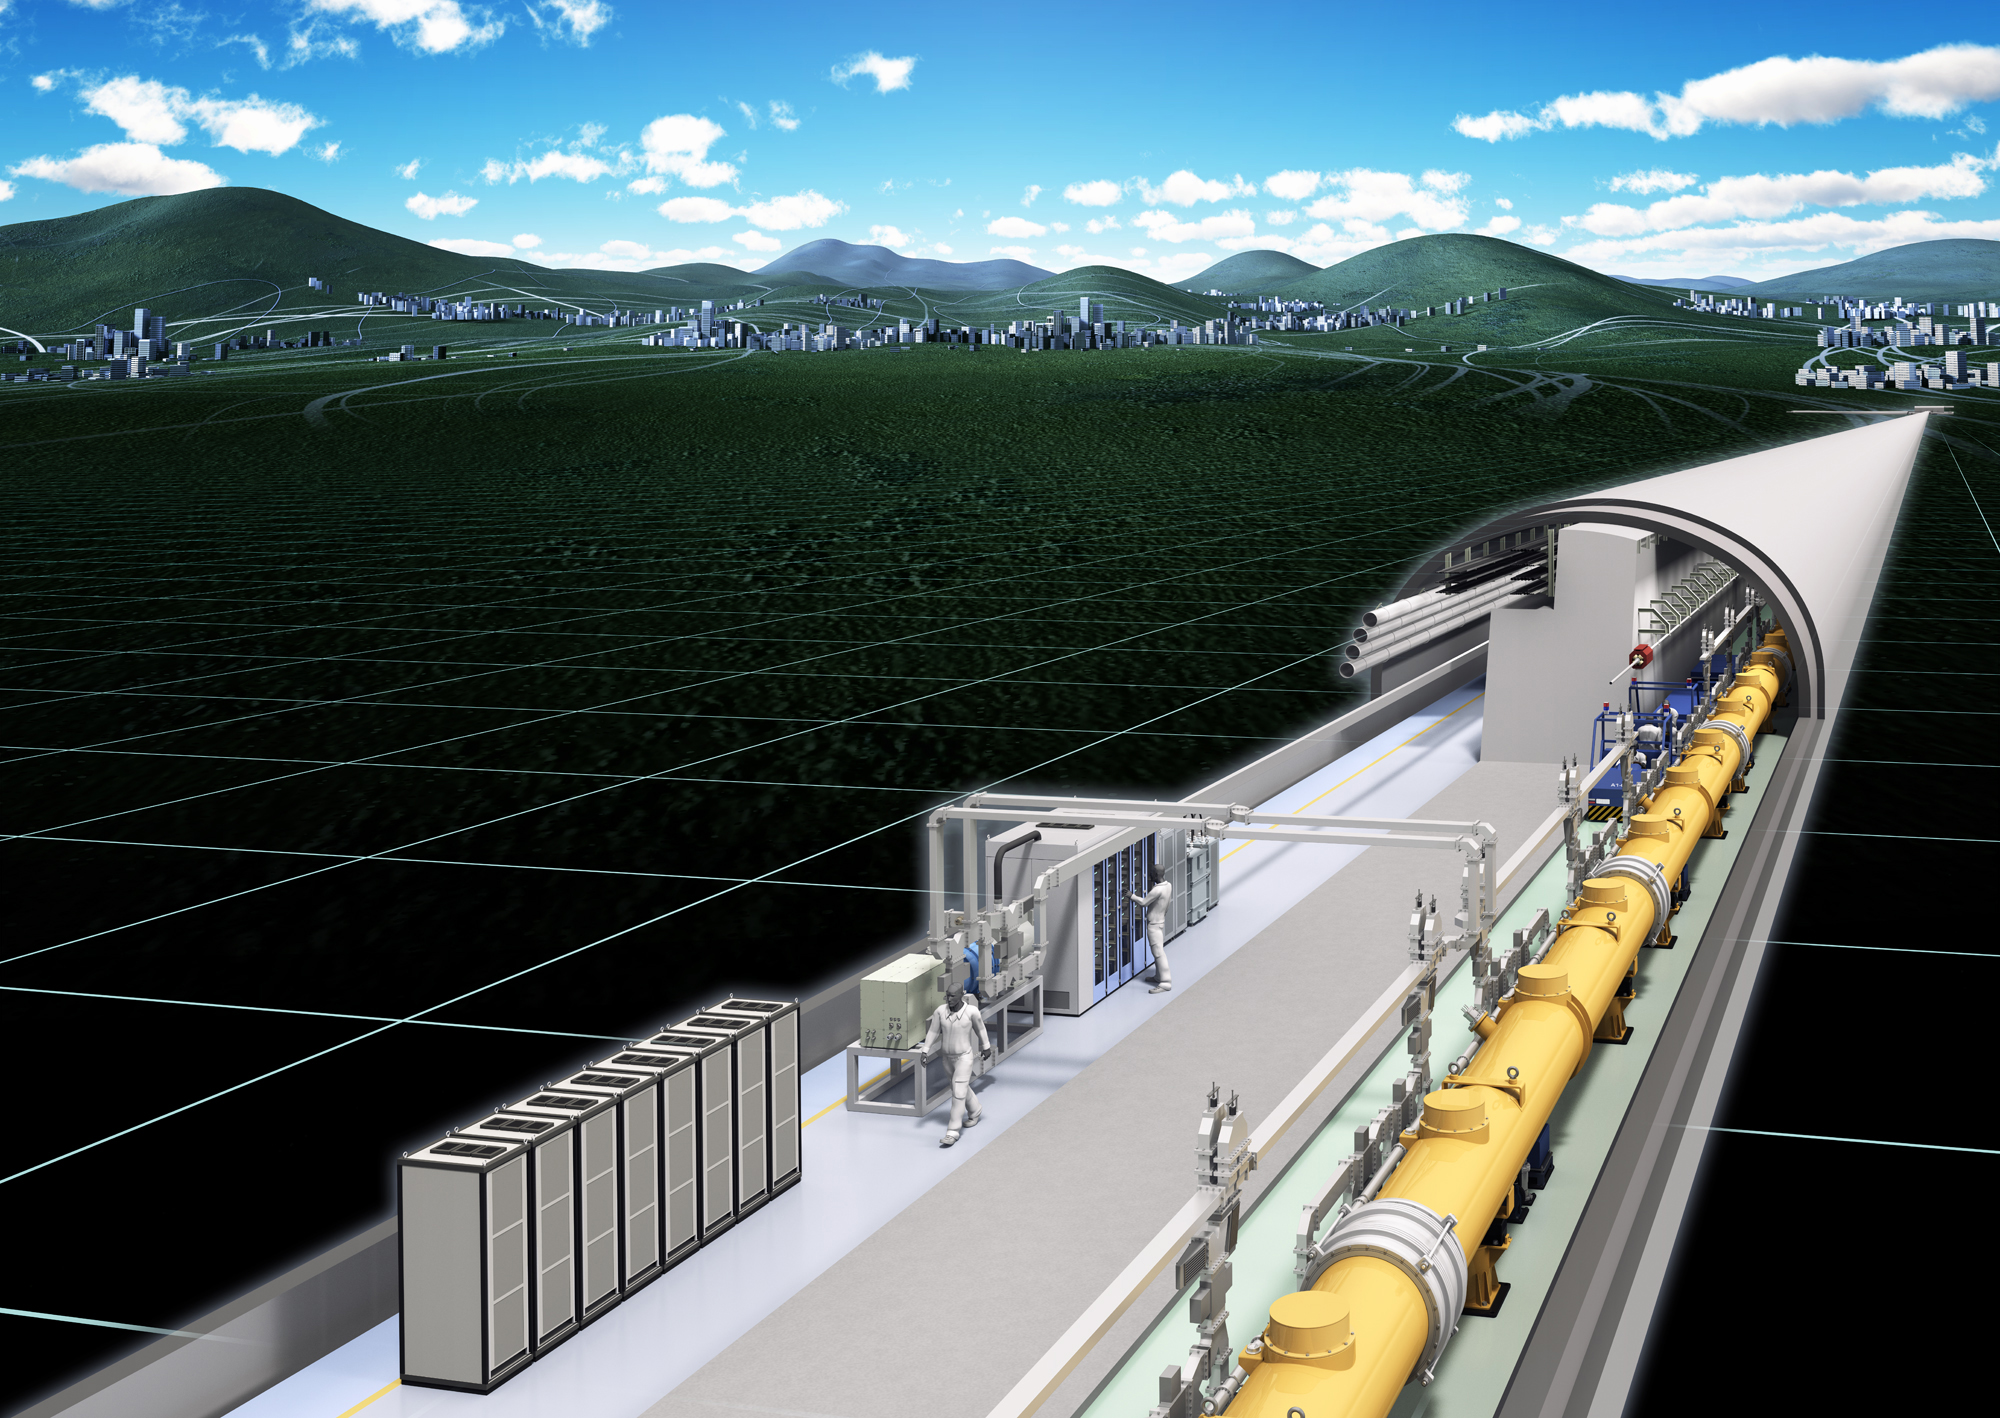 Hopes are running high that the Tohoku region will host the International Linear Collider, a cutting-edge particle accelerator that could uncover some of the most fundamental questions about the universe. | © REY. HORI